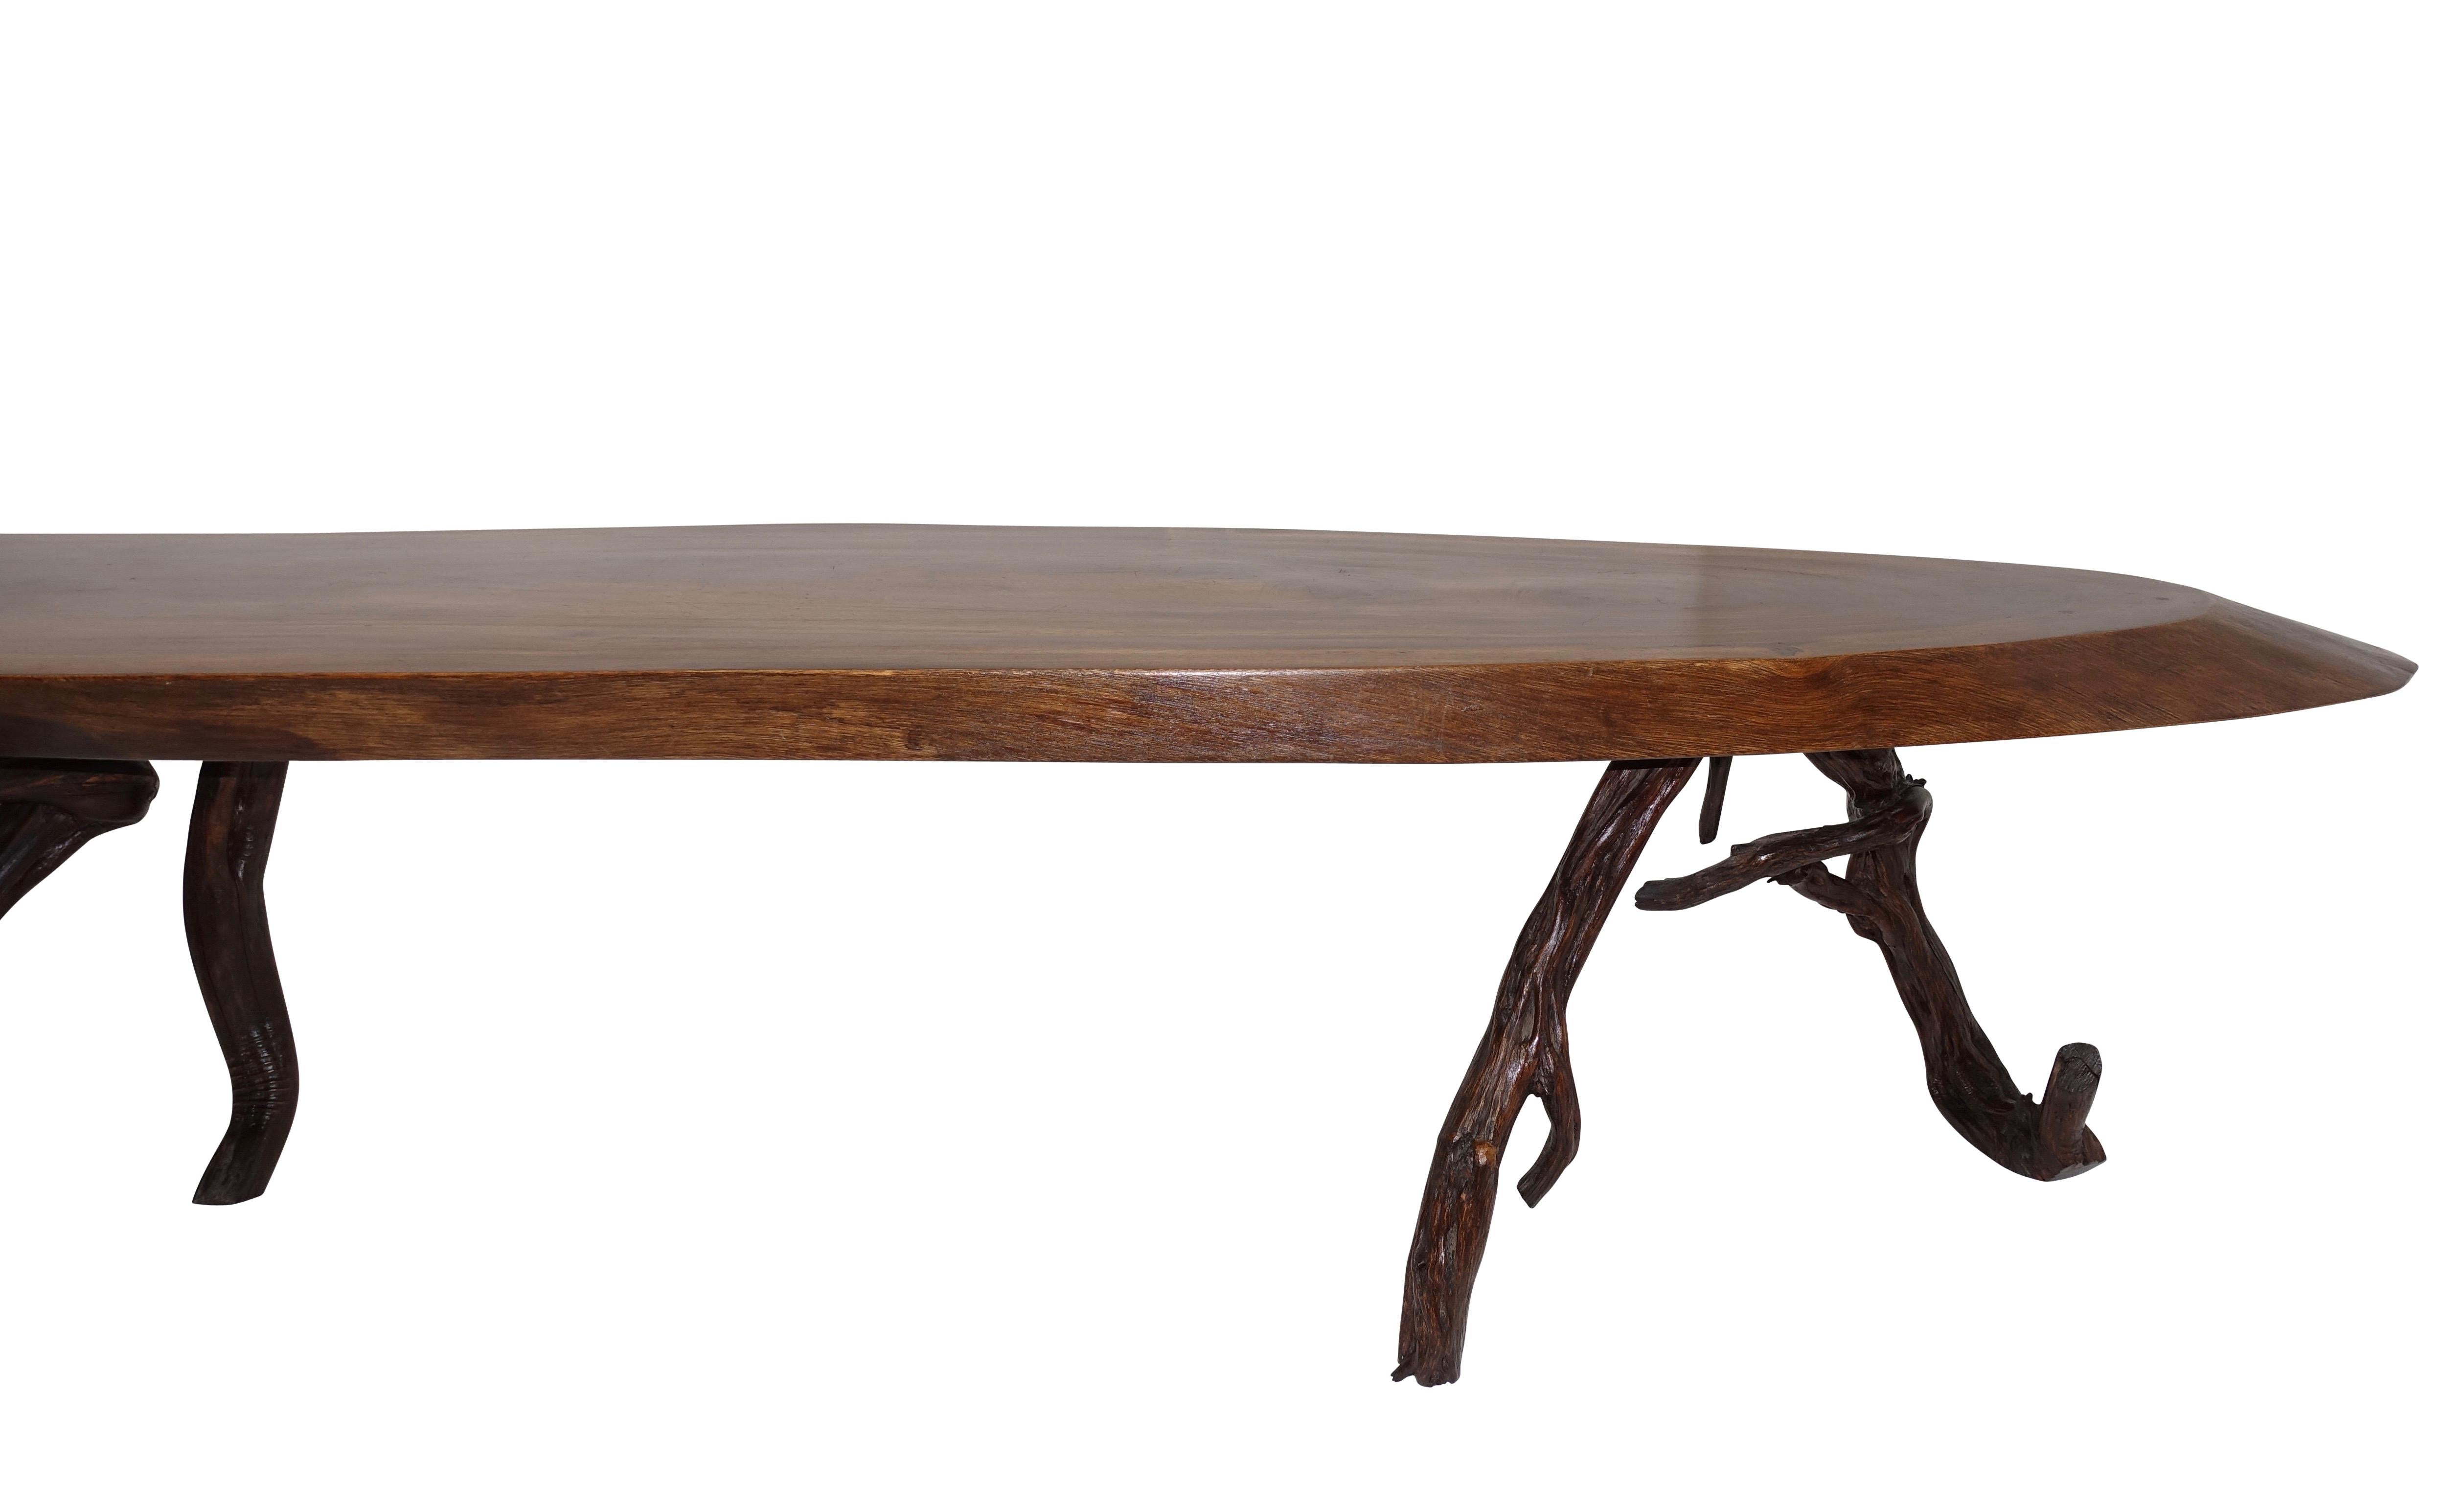 Large Walnut Slab Coffee Table, American, Mid-20th Century For Sale 7